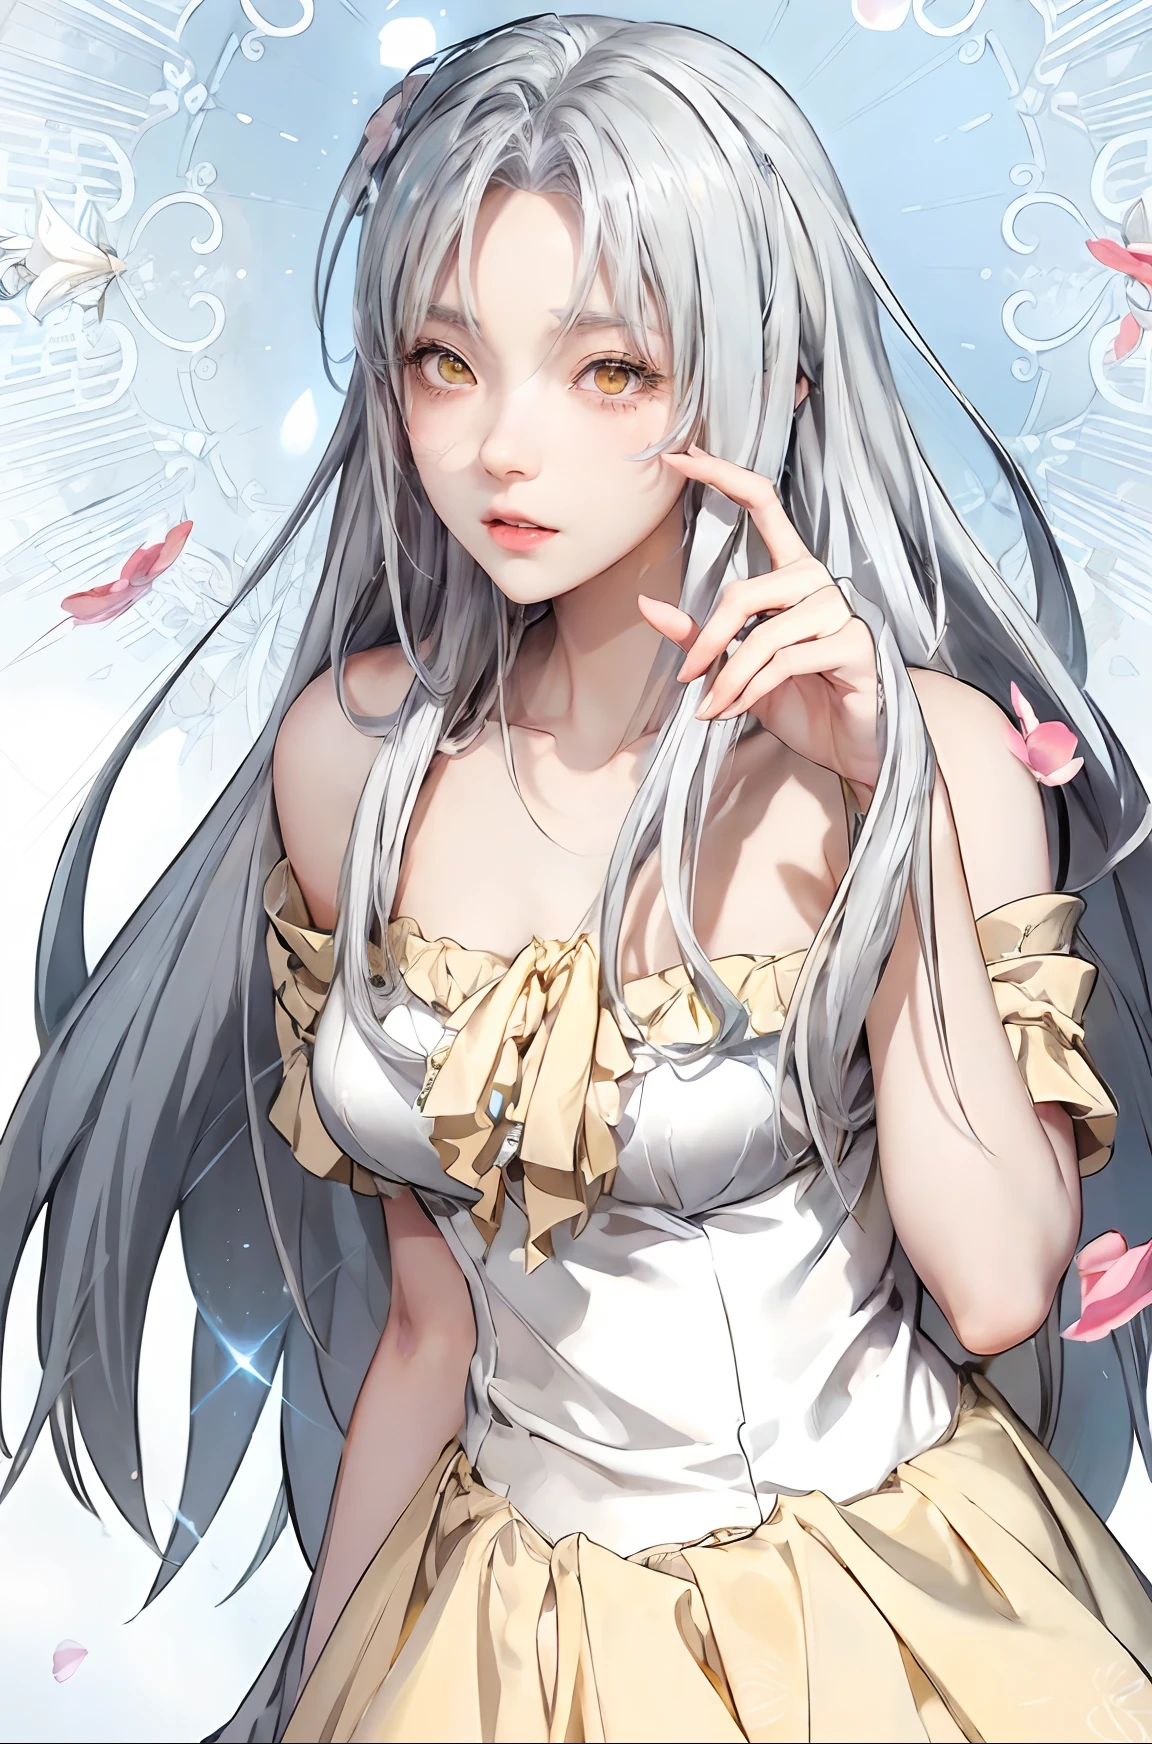 anime girl with gray hair and yellow and white color dress , detailed digital anime art, anime moe artstyle, highly detailed exquisite fanart, cushart krenz key art feminine, 8k high quality detailed art, zerochan art, clean detailed anime art